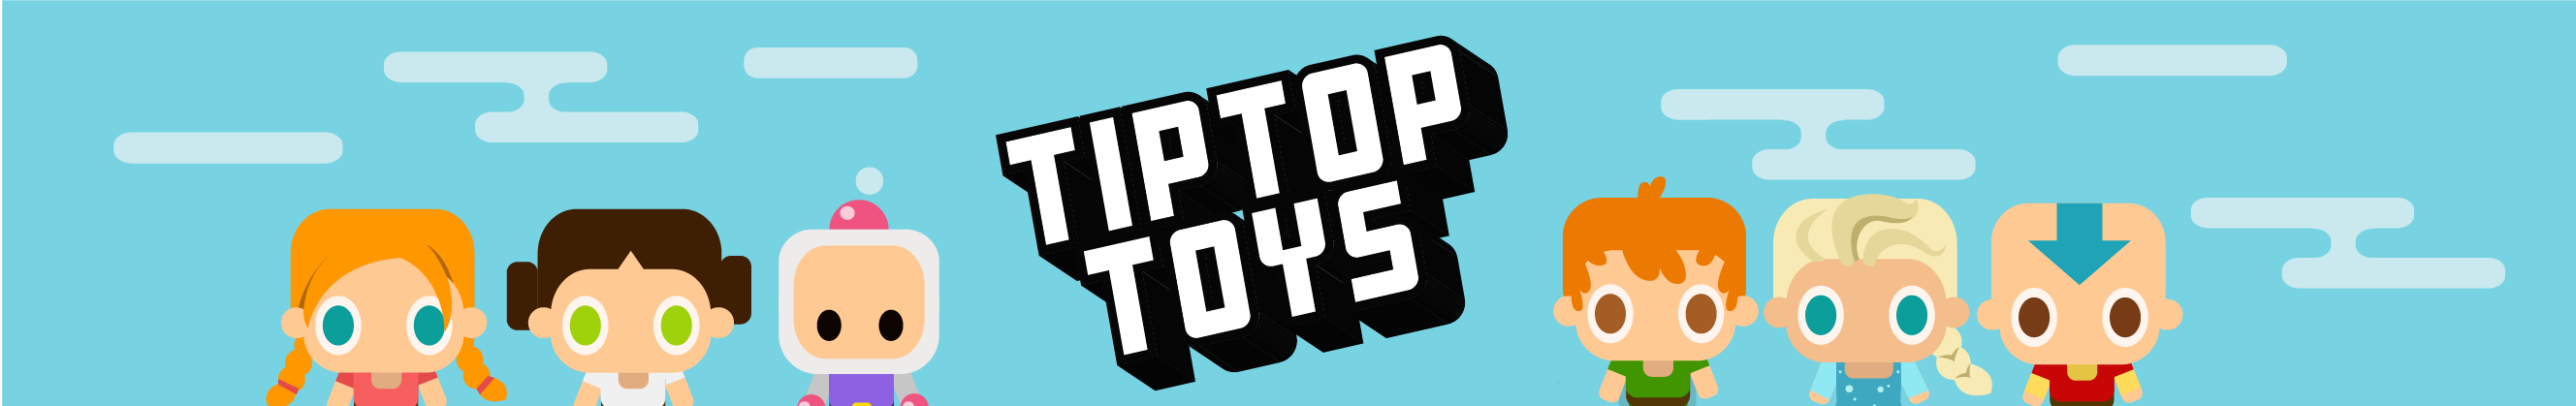 Tip Top Toys